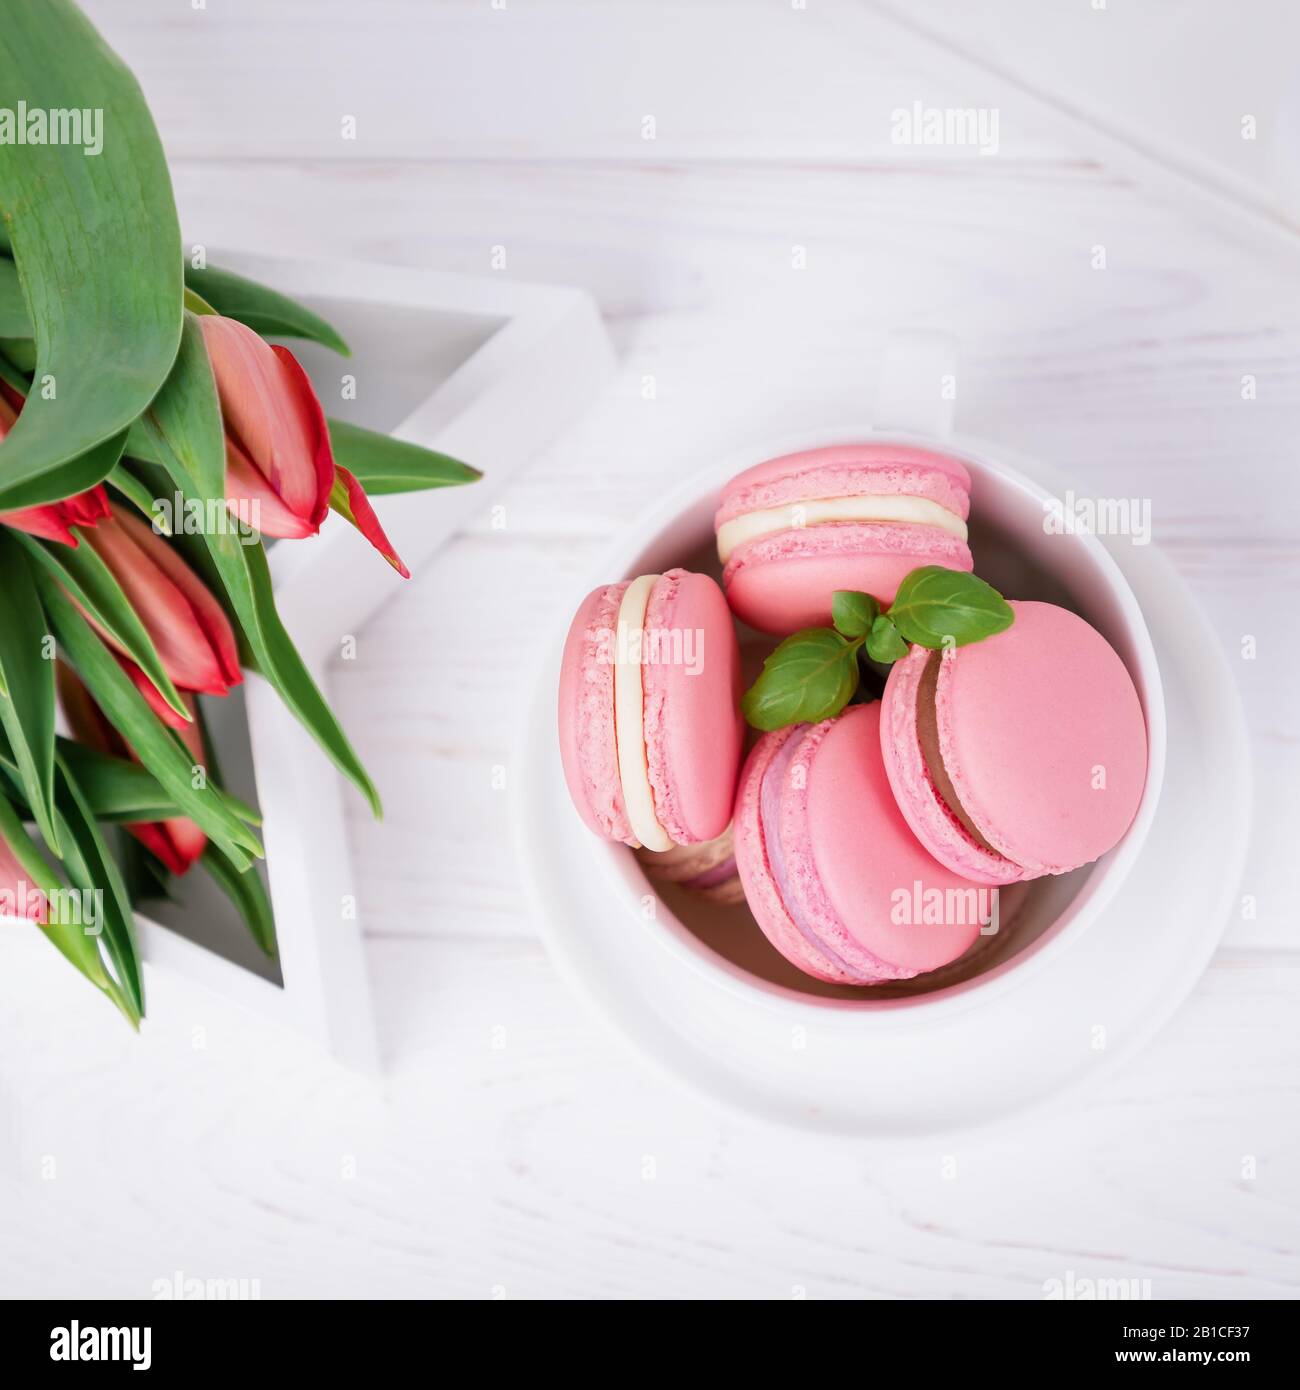 Homemade french dessert pink macaroons or macarons and spring tulips on ...